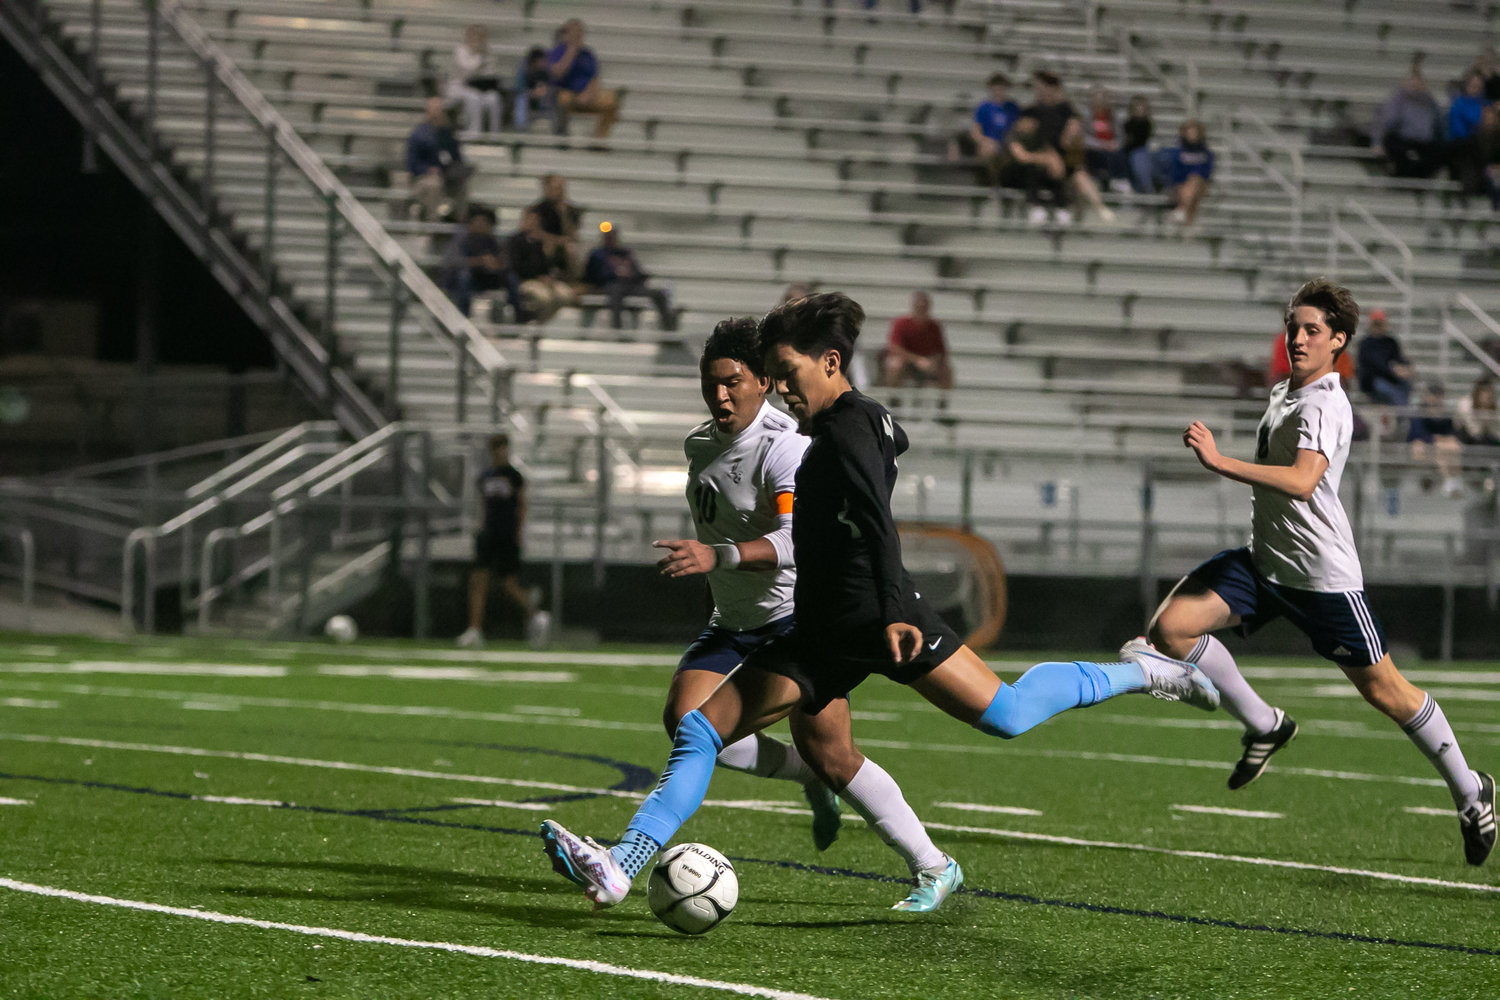 Cesar Garcia scores on a left footed shot during Tuesday's match between Paetow and Lamar at the Spring Woods football field.